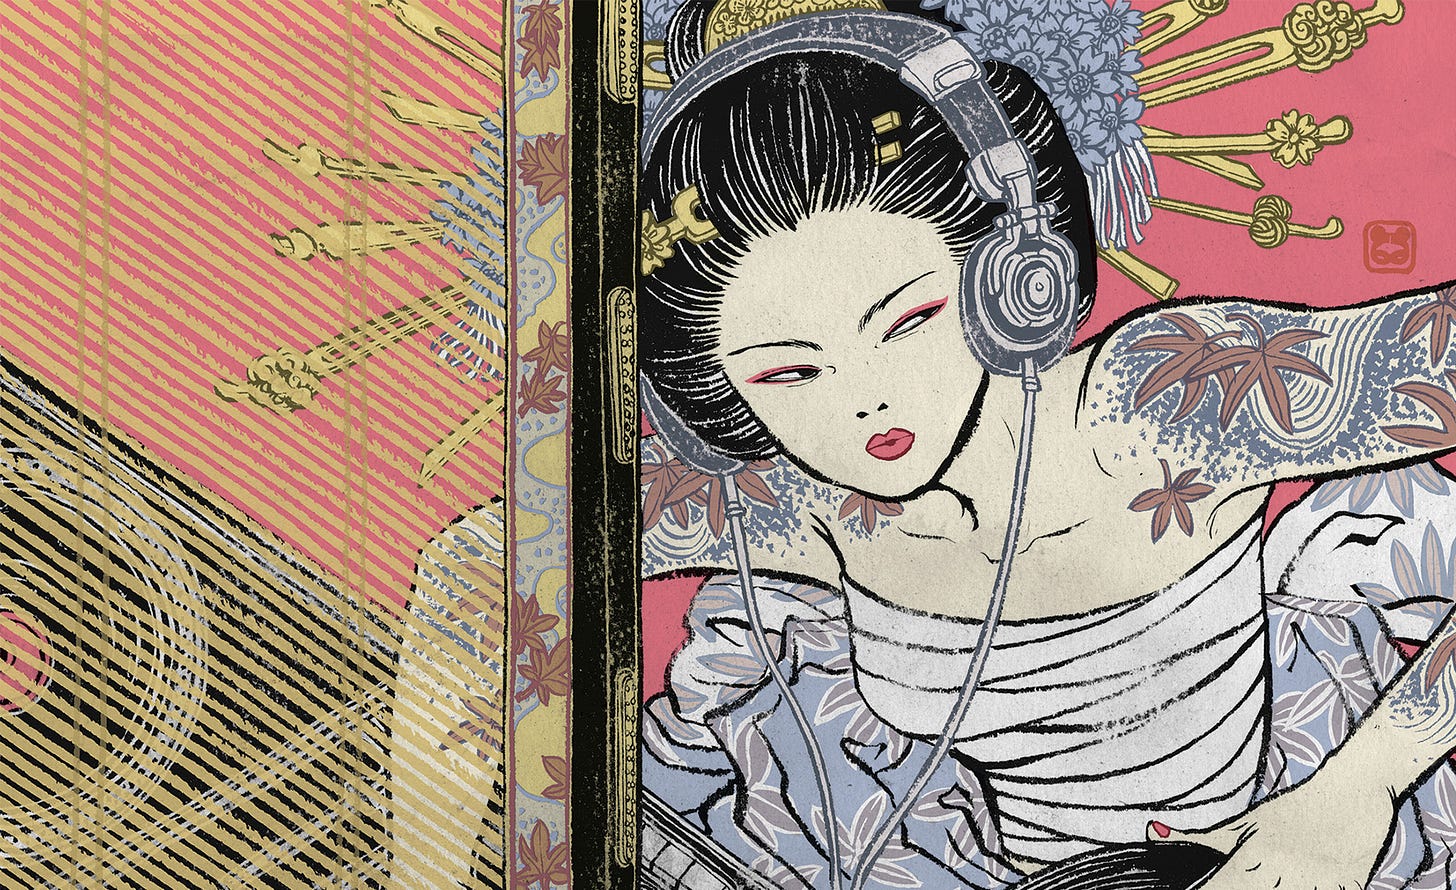 Yuko Shimzu art featuring a girl with tattoos and headphones. Lots of cool textures and detail.